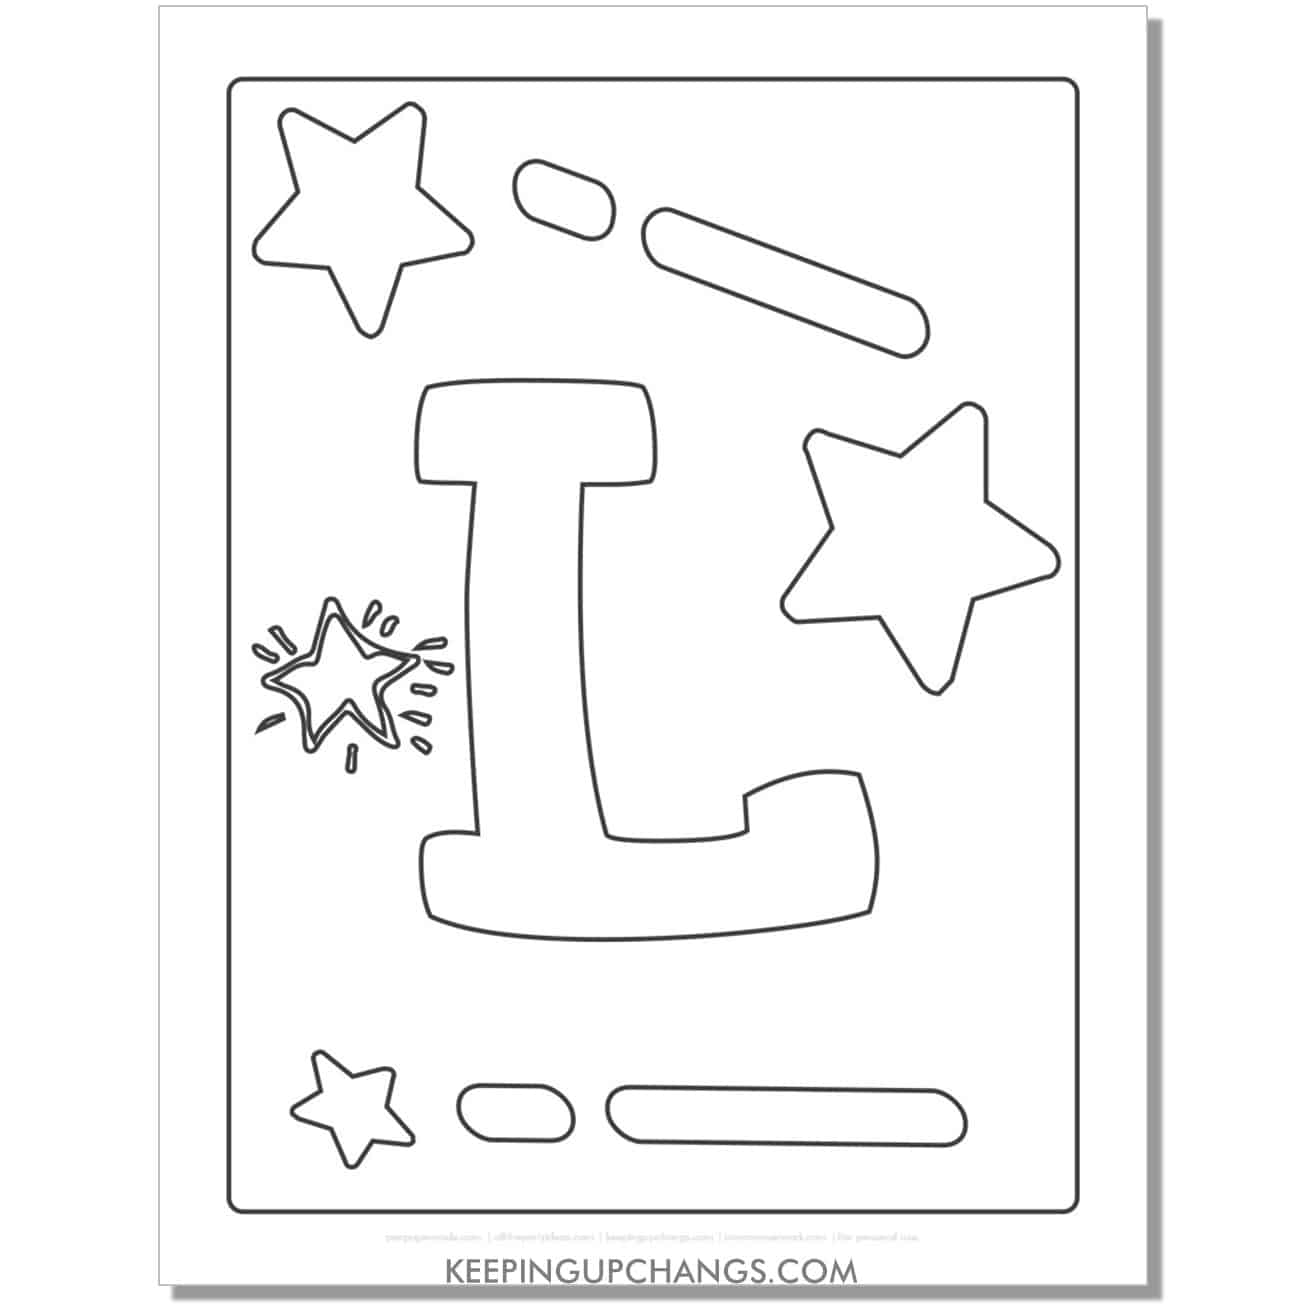 cool letter l to color with stars, space theme.